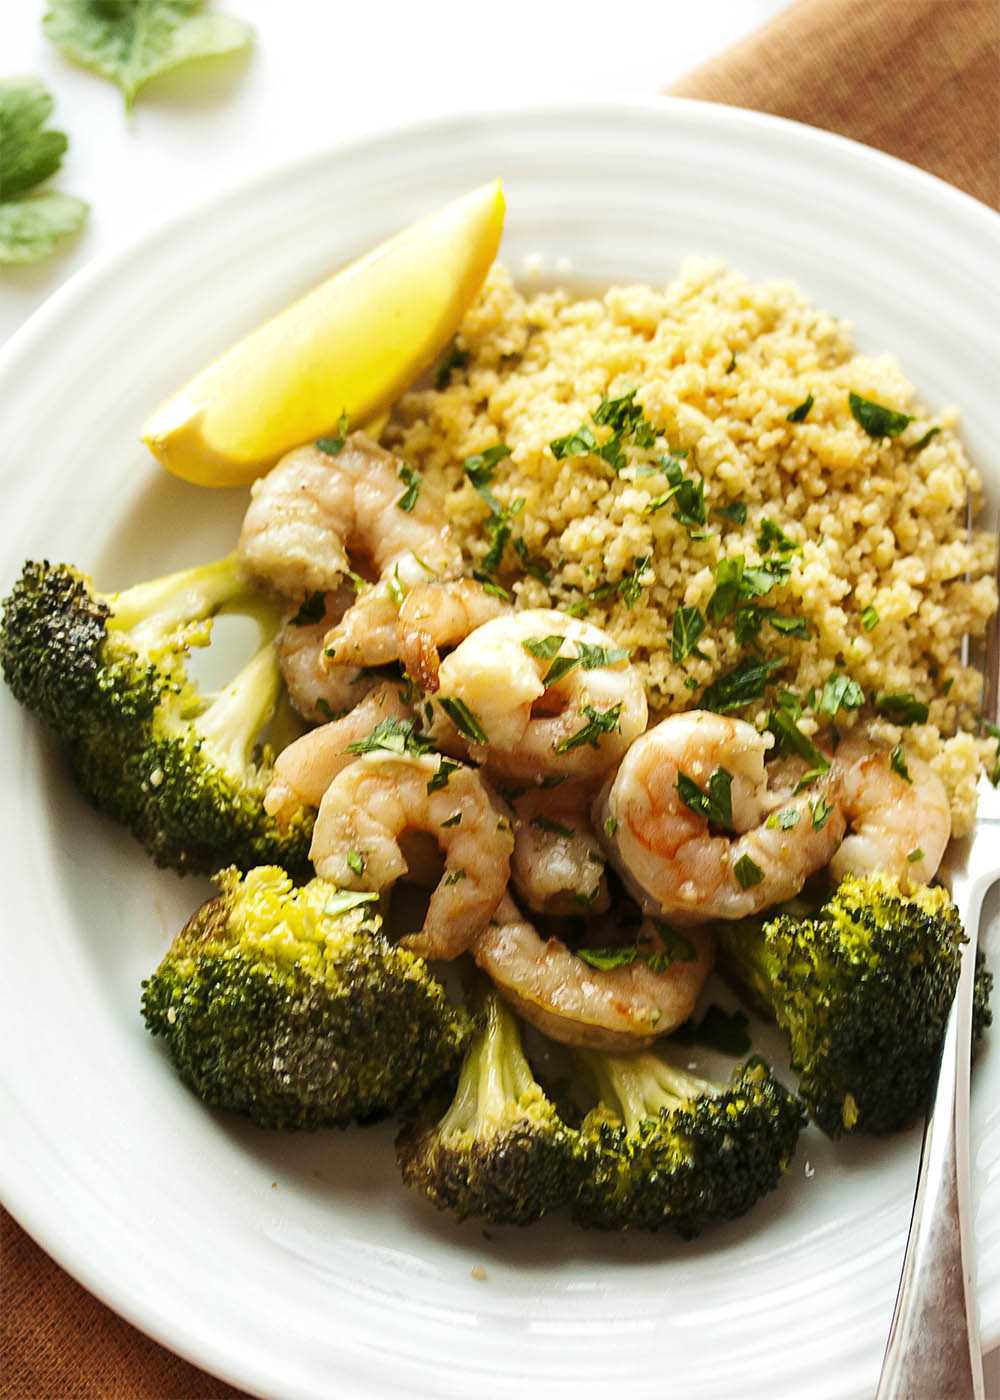 Oven Roasted Shrimp and Broccoli - This simple and satisfying dinner of shrimp, broccoli, and couscous goes from oven to table in only 20 minutes and two pans. | justalittlebitofbacon.com